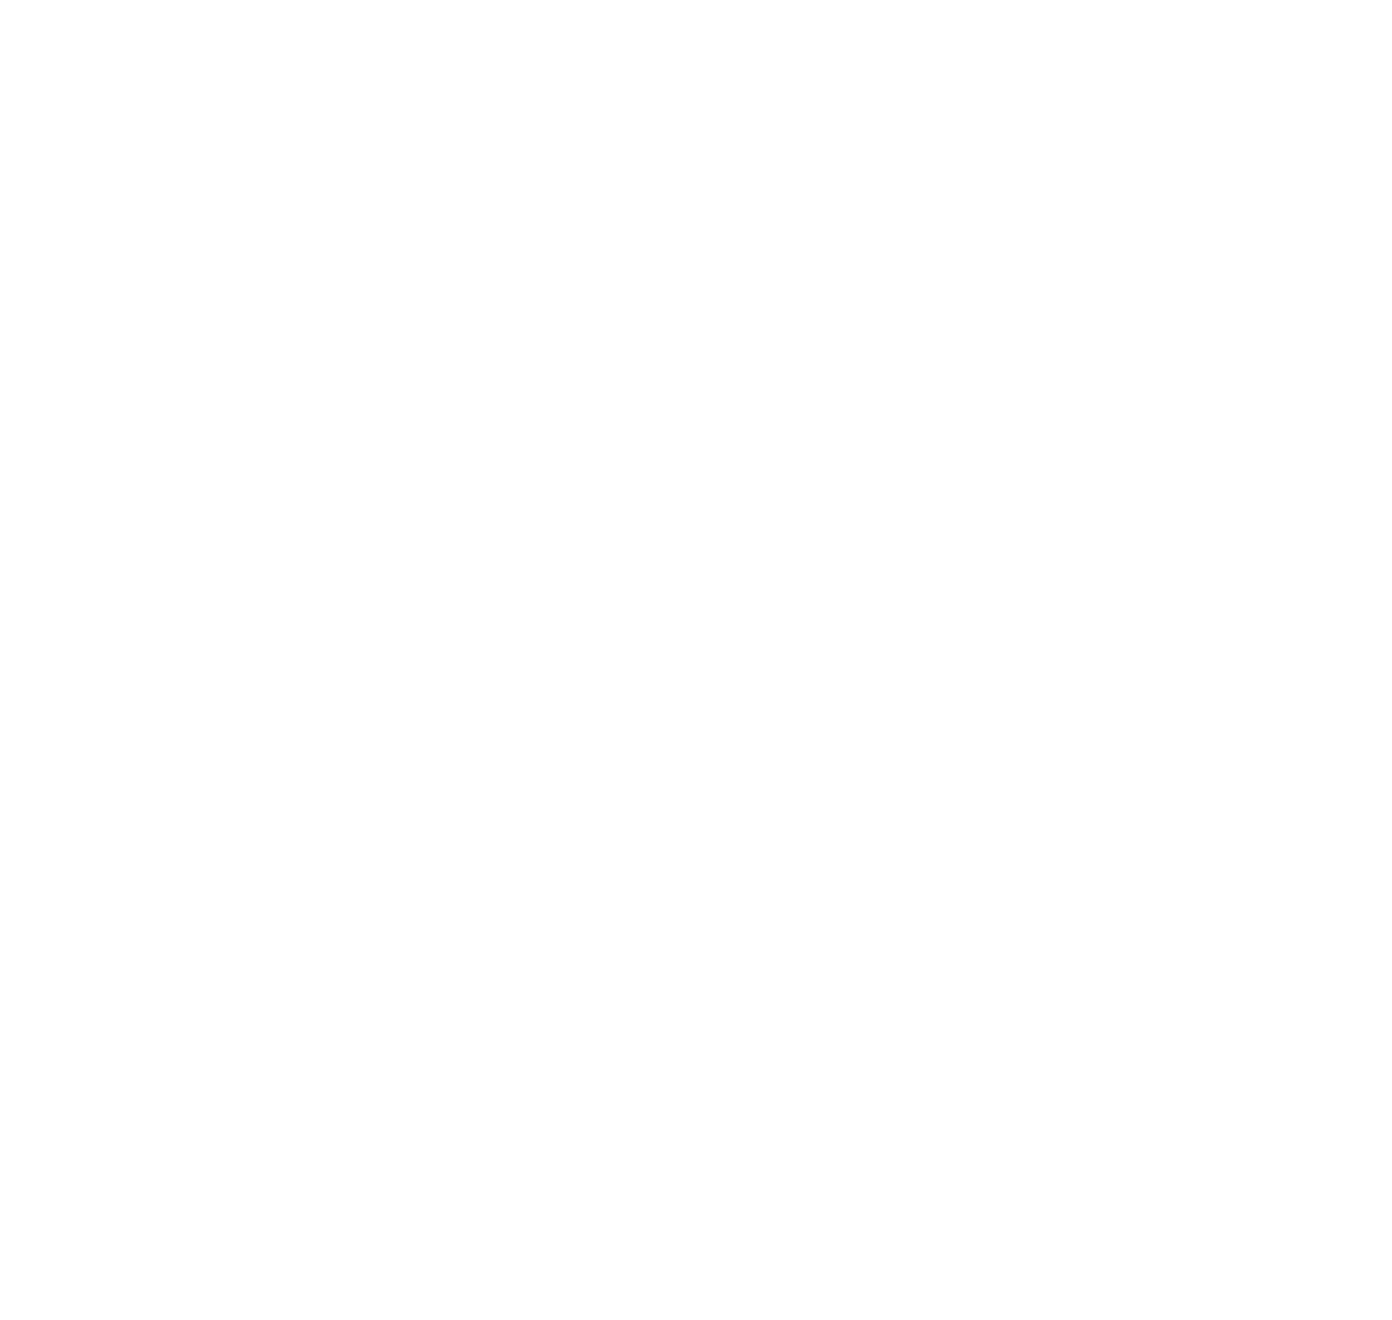 ONE (Owl North East) Trust